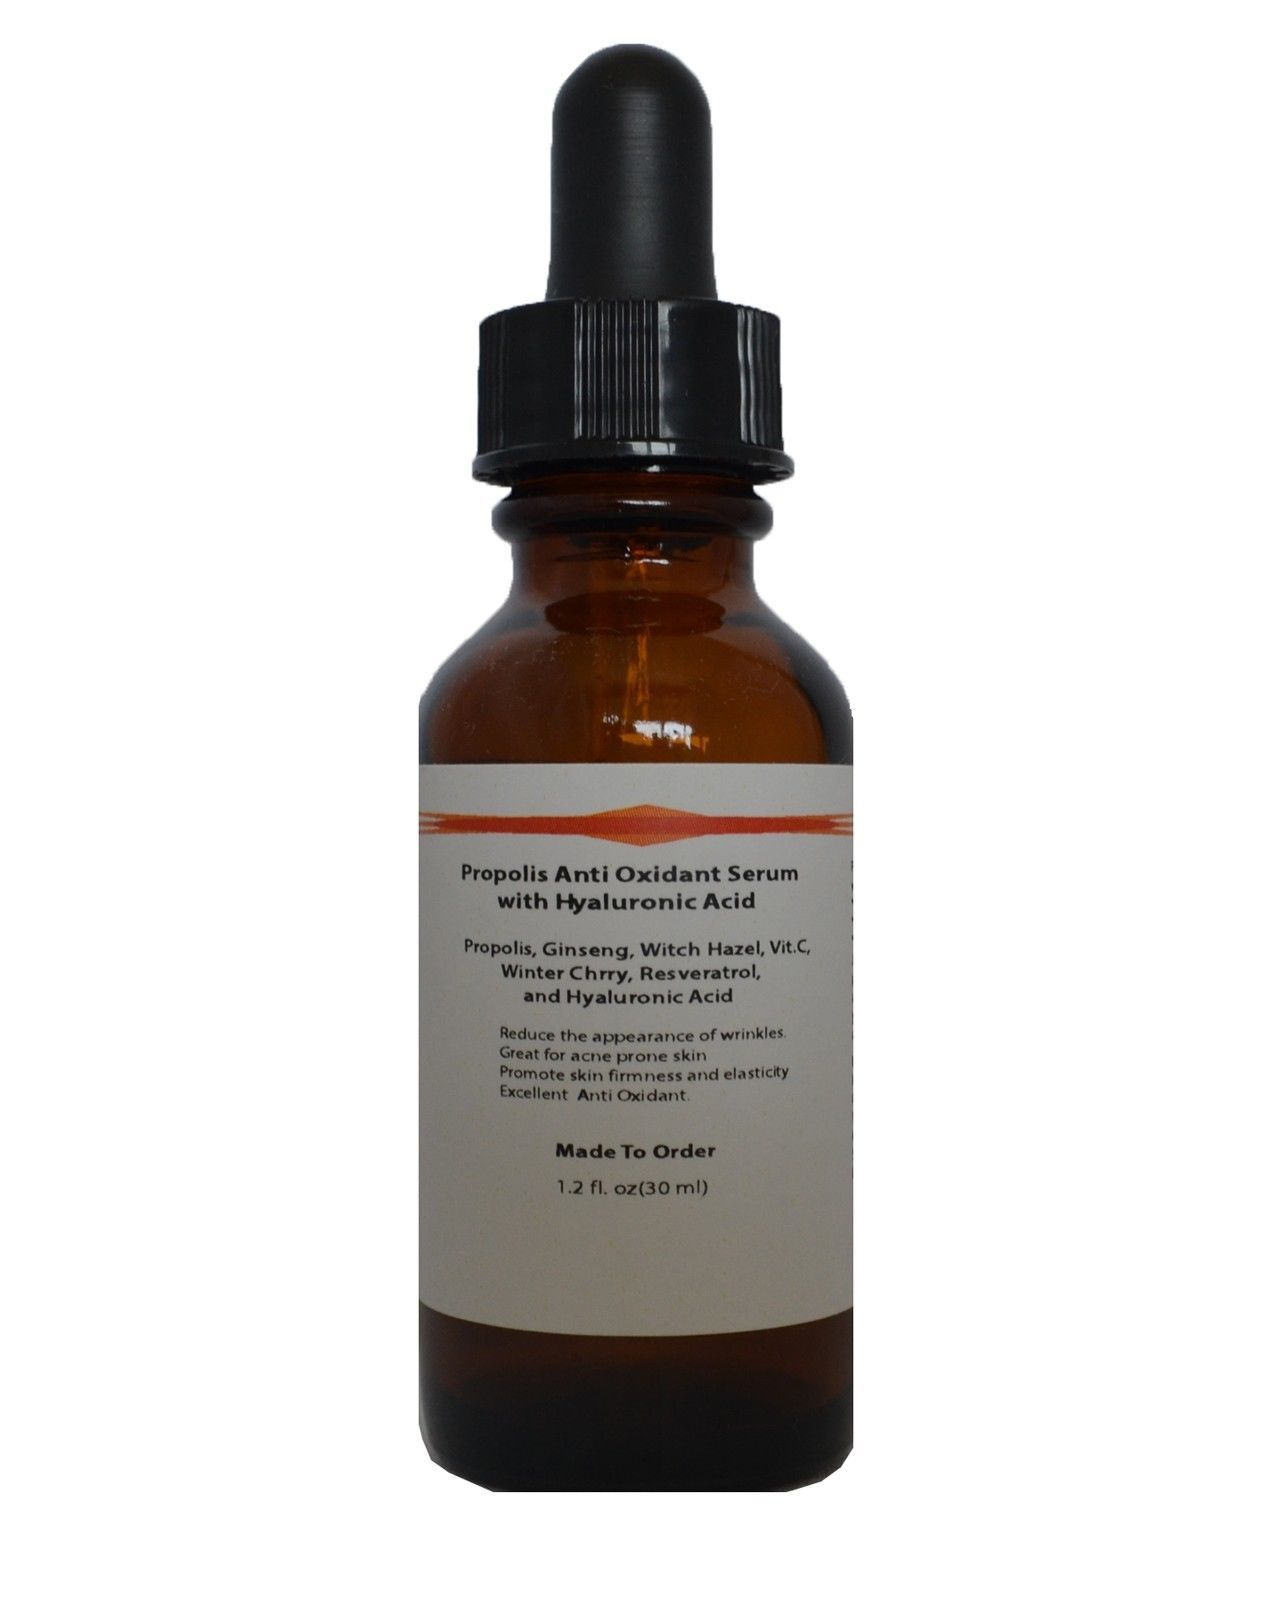 Propolis Anti Oxidant Serum with Ginseng, Witch Hazel, and Hyaluronic Acid - $16.34 - $26.24